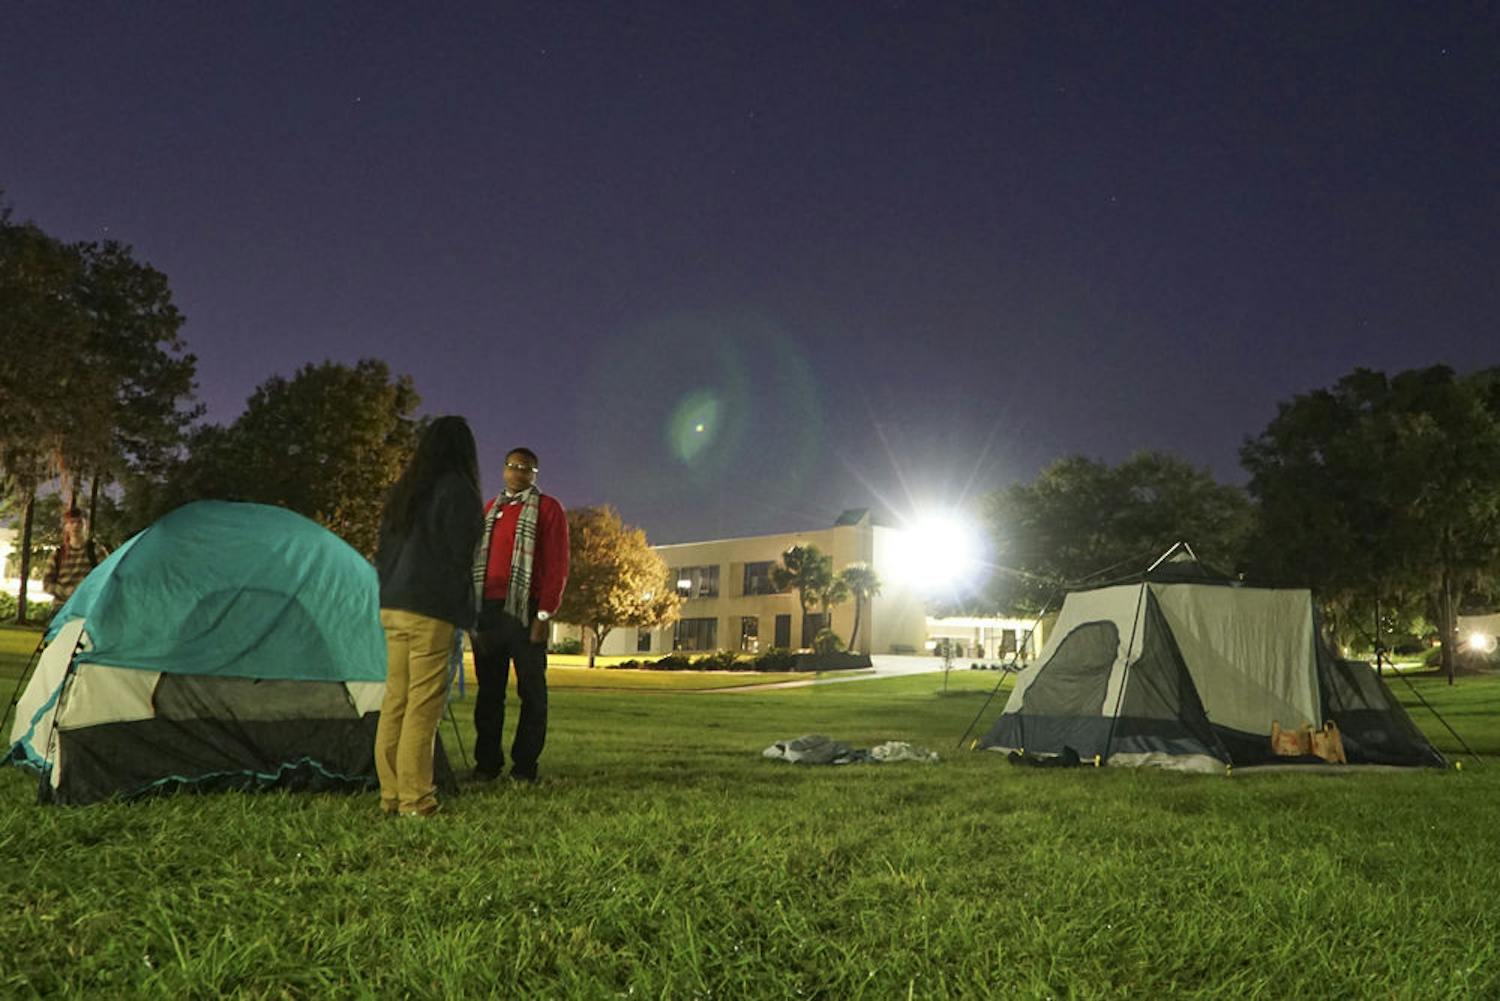 Clarinda Choice (left), a 29-year-old Santa Fe student leadership and activity specialist, and Jacobi Bedenfield, a 19-year-old Santa Fe agriculture freshman, chat under Santa Fe's "Oak Grove" late Nov. 23, 2015. Choice and Bedenfield were two of the five participants raising awareness for homelessness by camping overnight at the college.